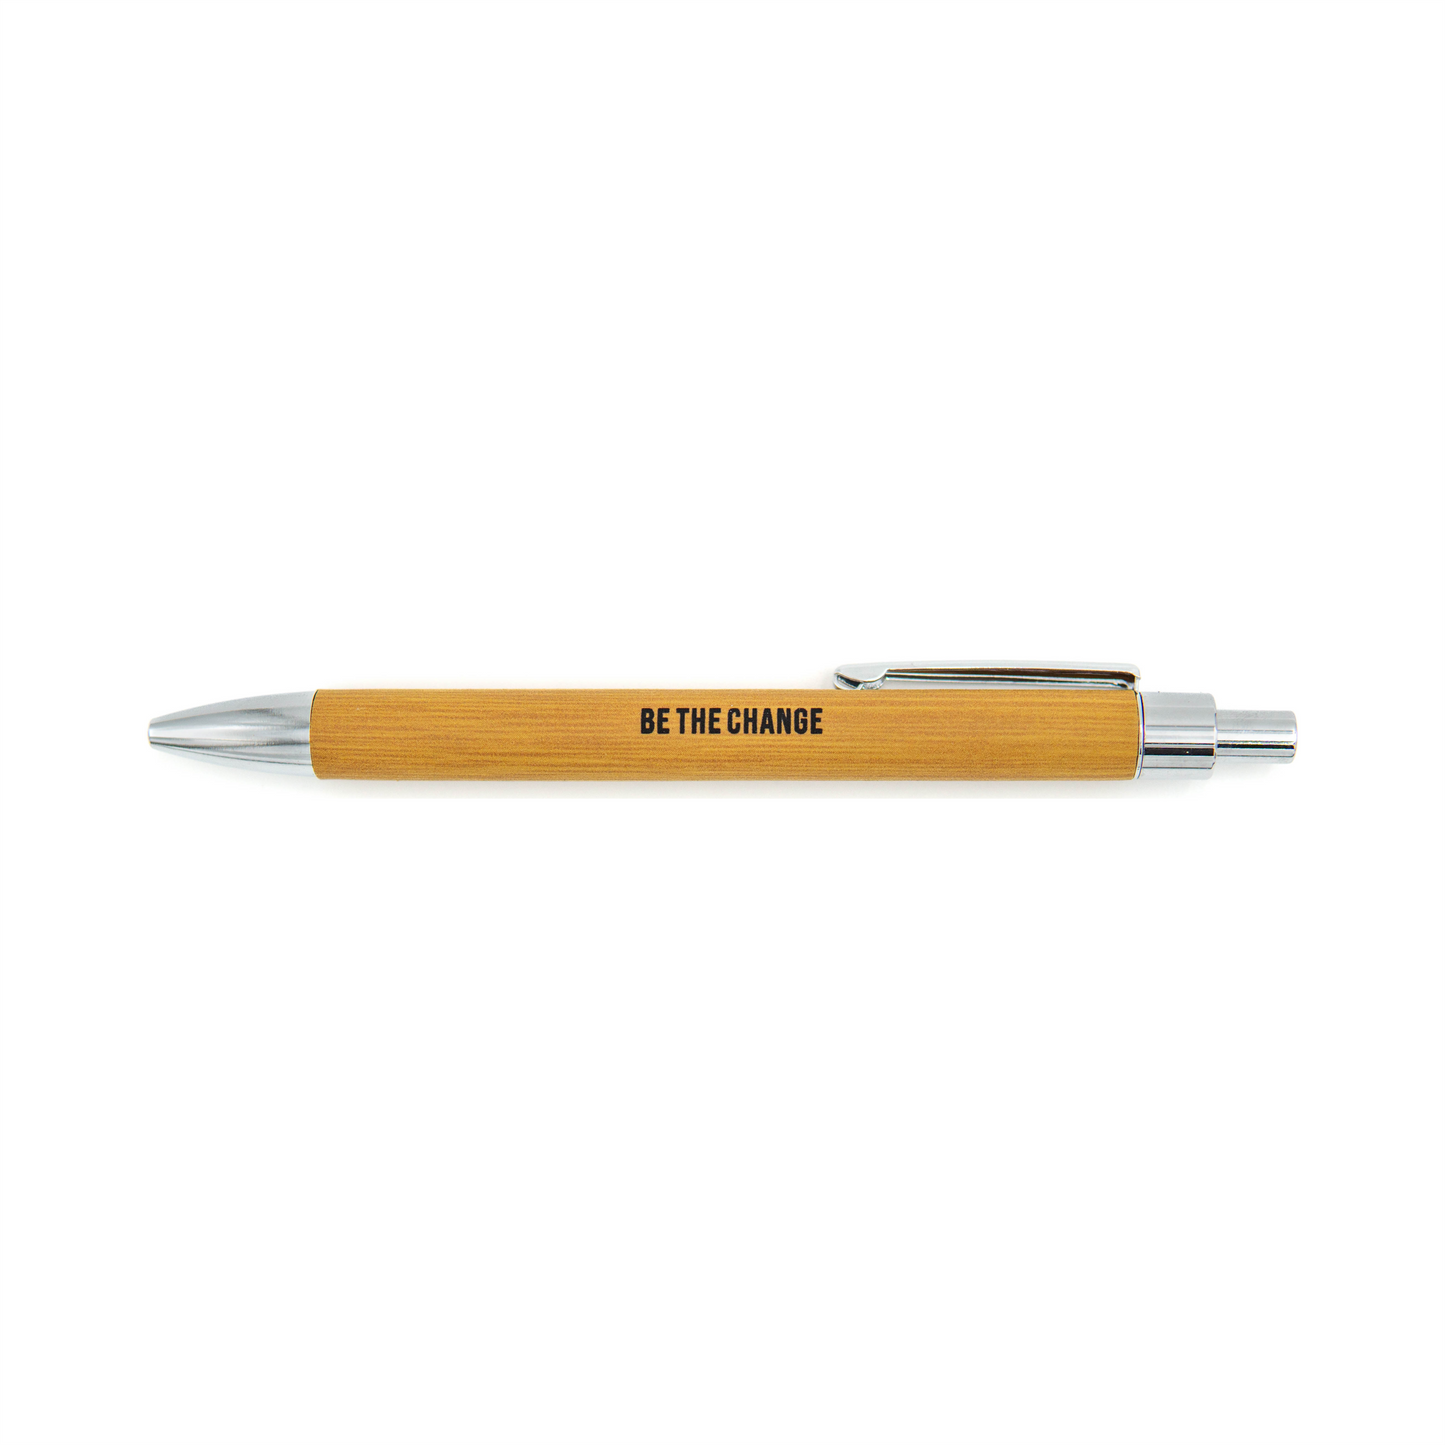 Be The Change - Vegan Leather Pen